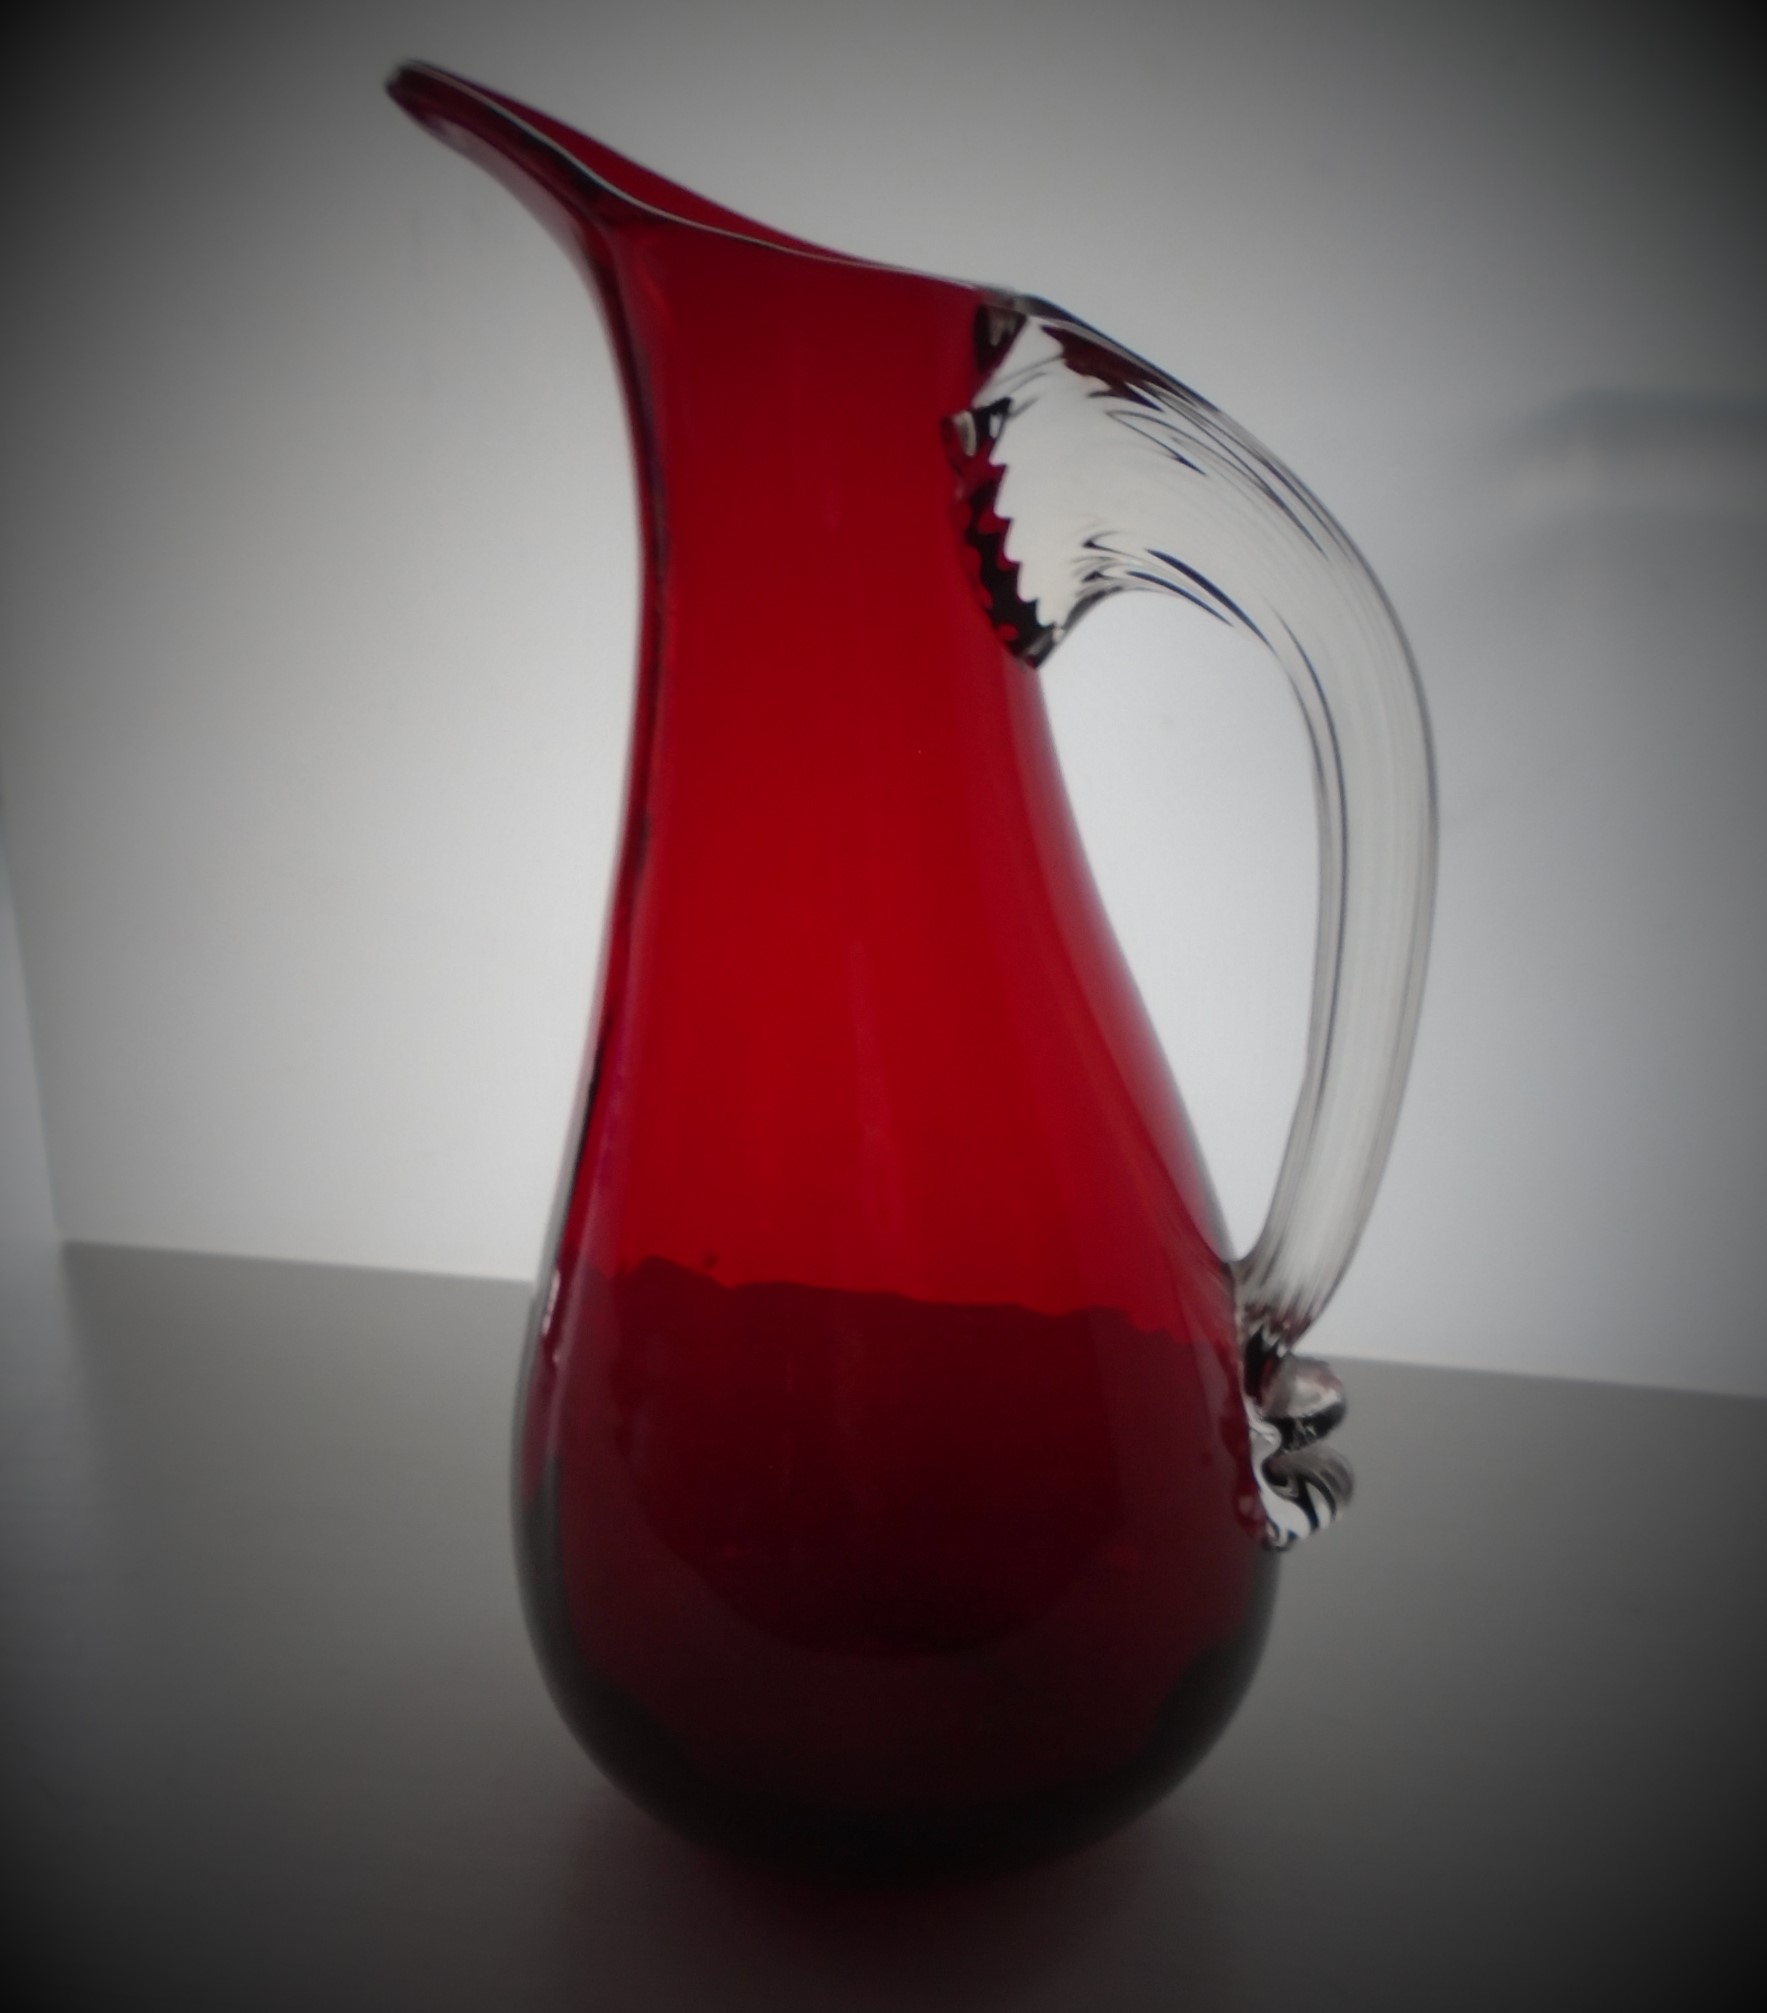 Whitefriars GEOFFREY BAXTER Ruby with clear handle glass jug.  Catalogue No. 9419